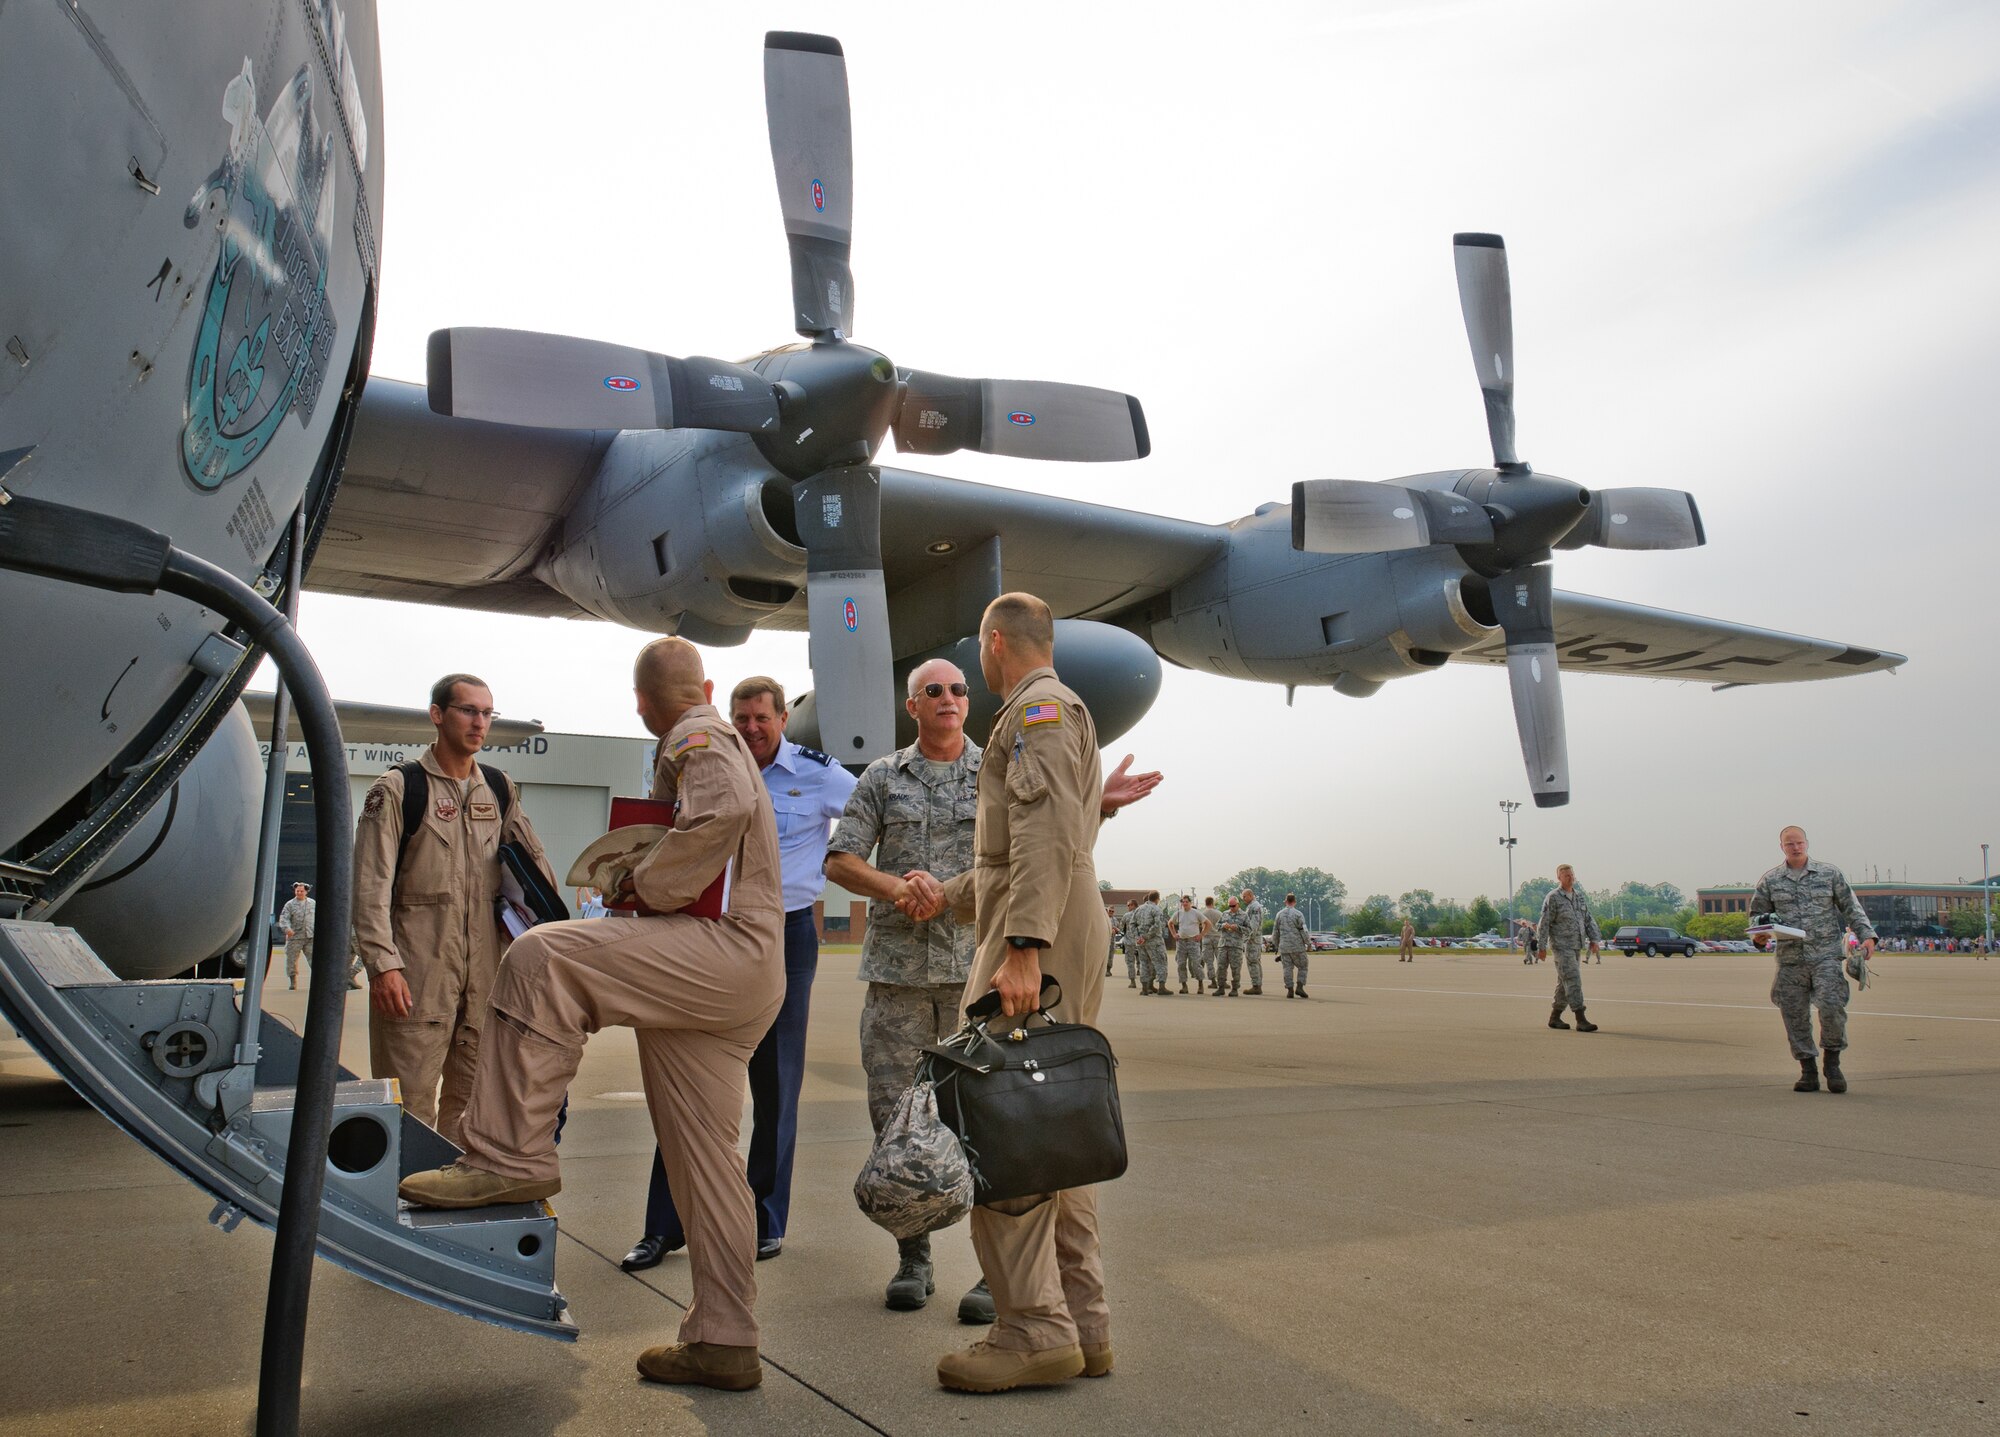 Kentucky's adjutant general, Maj. Gen. Edward W. Tonini, and Brig. Gen. Mark Kraus, Kentucky's assistant adjutant general for Air, shake hands with Airmen from the 123rd Airlift Wing as they board a C-130 at the Kentucky Air National Guard Base in Louisville, Ky., prior to a deployment to the Persian Gulf region on July 2, 2012. The wing deployed 70 Airmen and two C-130 aircraft in support of operations Enduring Freedom and New Dawn. (U.S. Air Force photo by Master Sgt. Phil Speck)